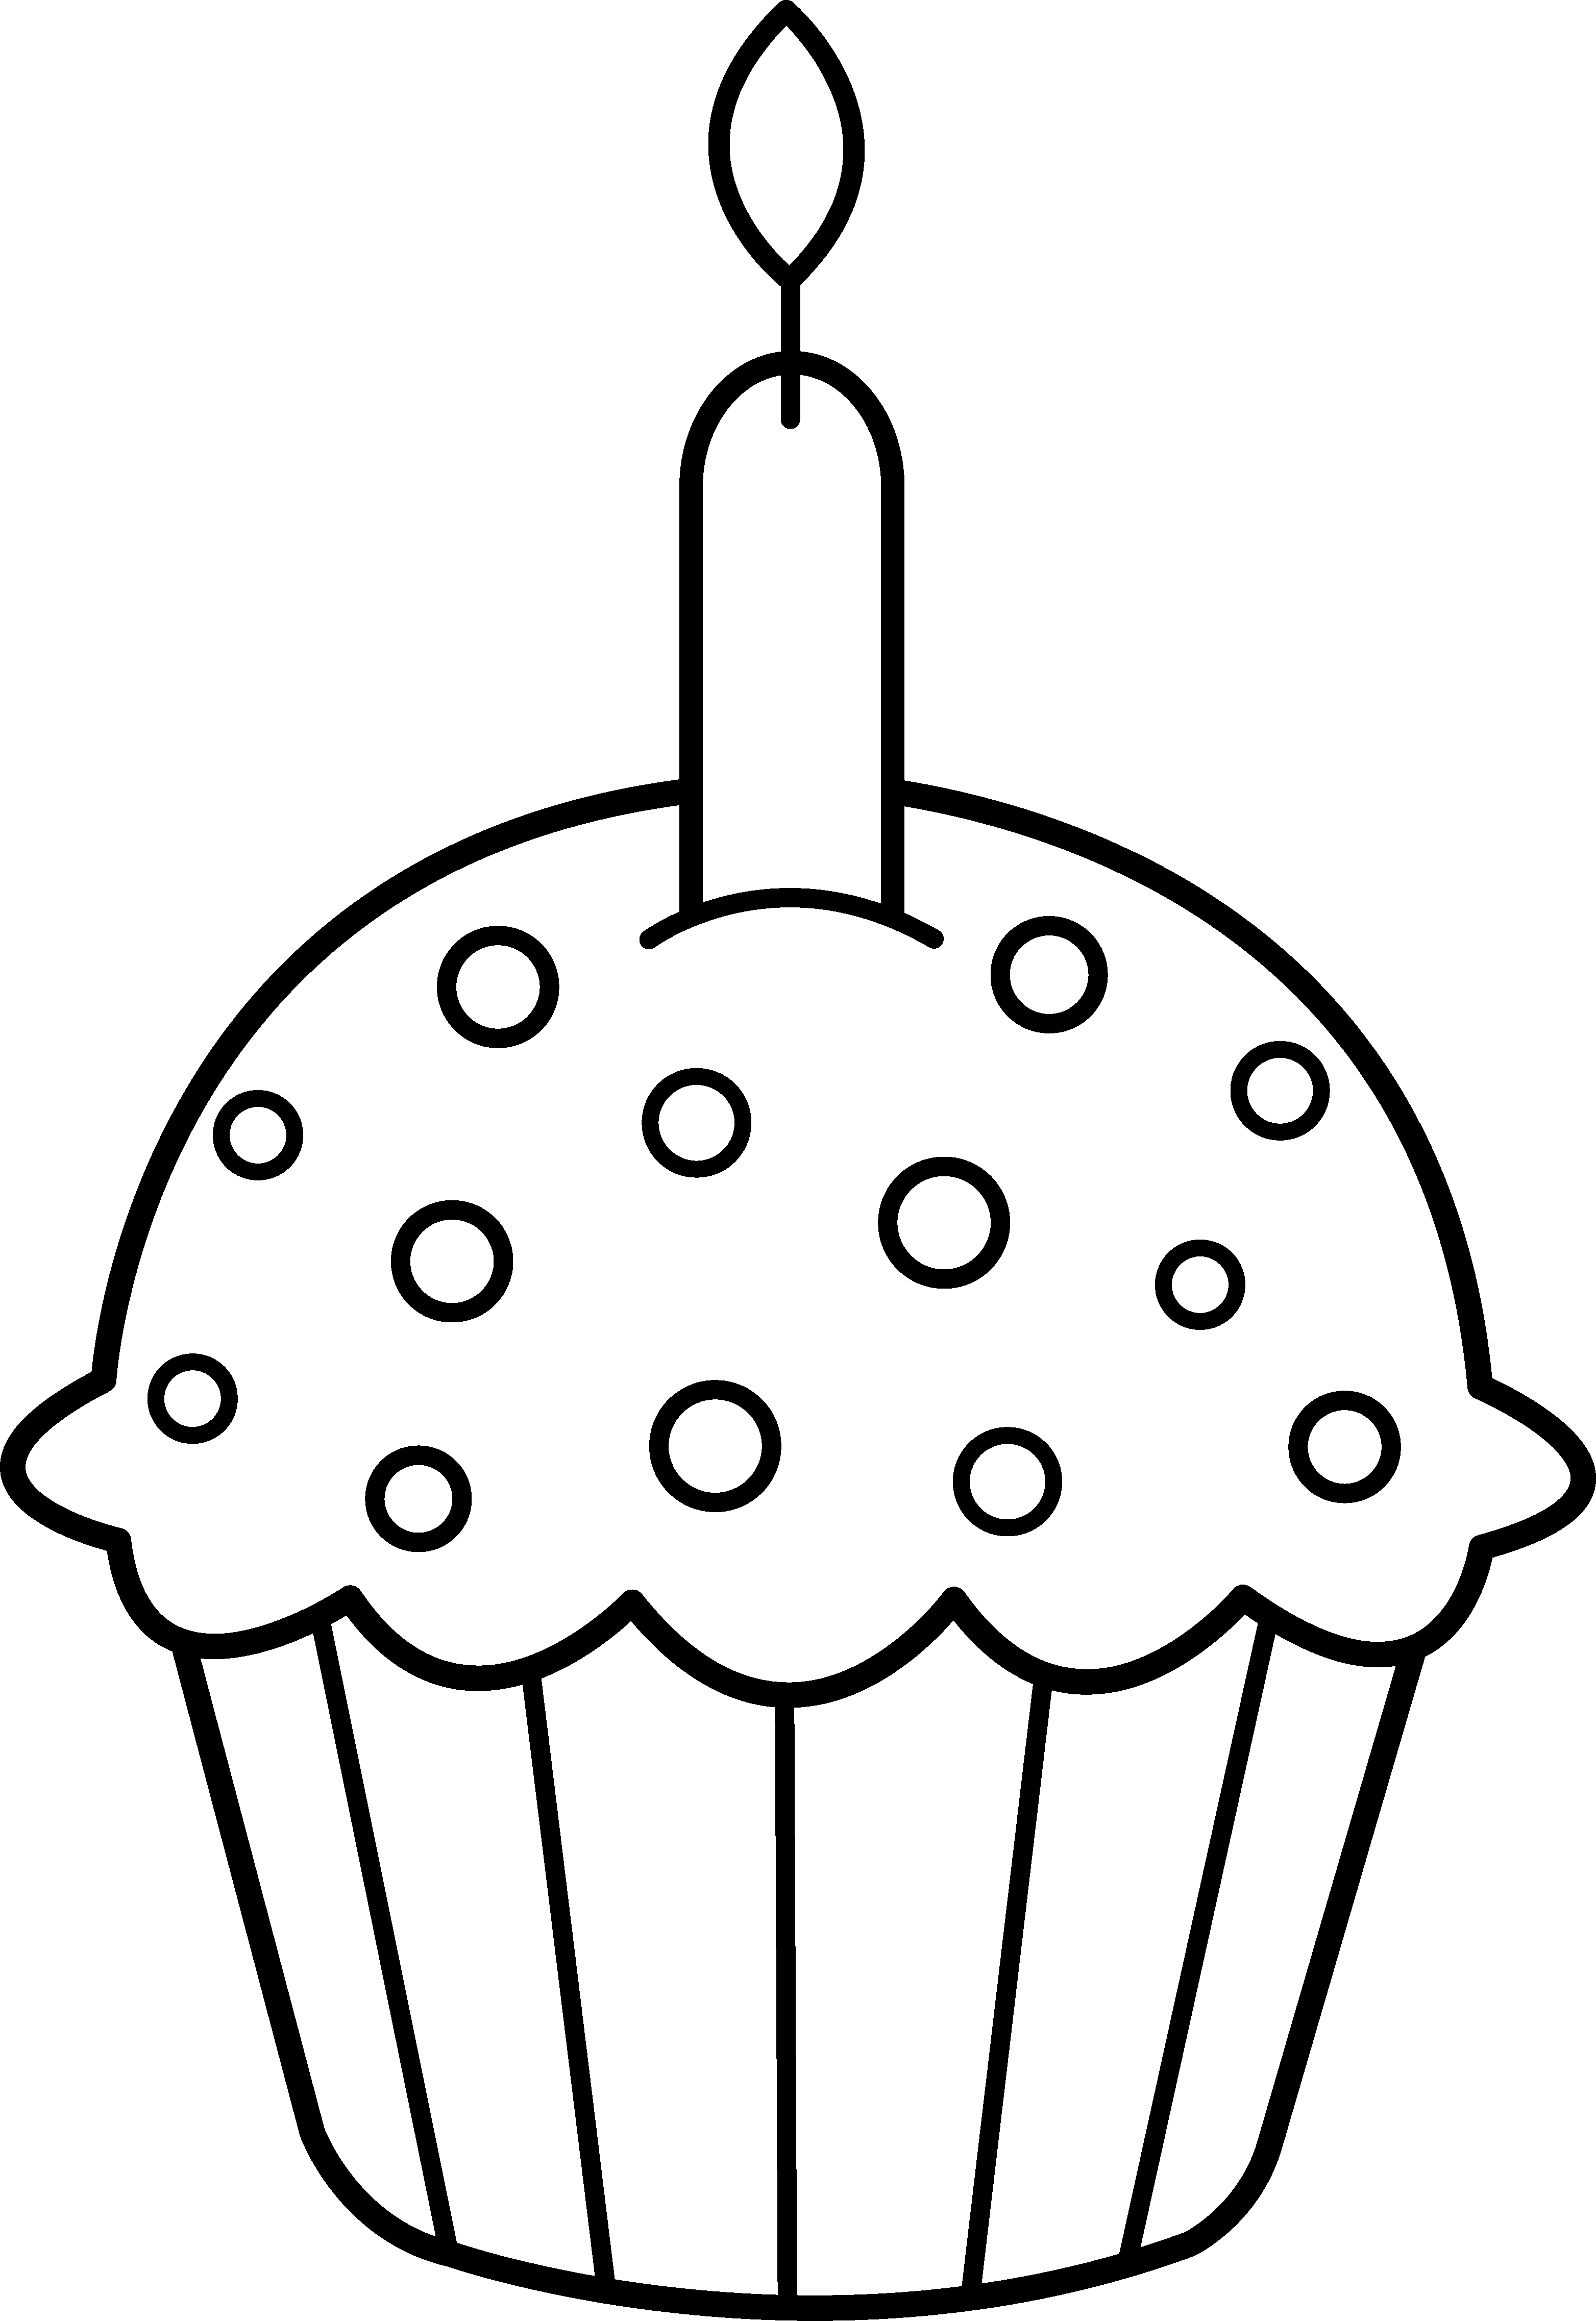 Cupcake with candle clipart black and white